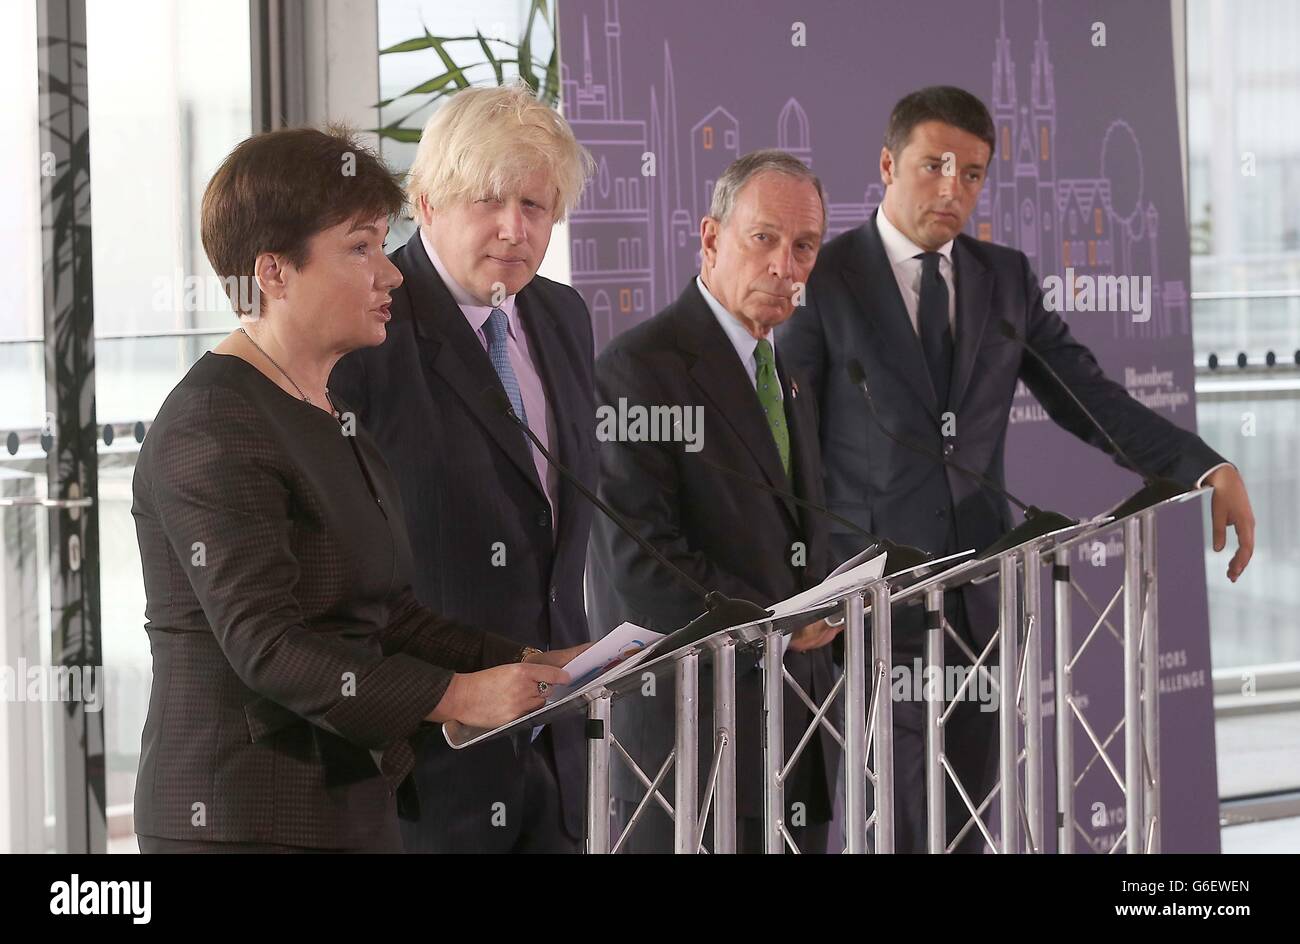 (left to right) Hanna Gronkiewicz-Waltz the mayor of Warsaw, Boris Johnson the Mayor of London, Michael Bloomberg the Mayor of New York and Matteo Renzi the Mayor of Florence at the launch of the Mayors Challenge in Europe at City Hall in London. Stock Photo